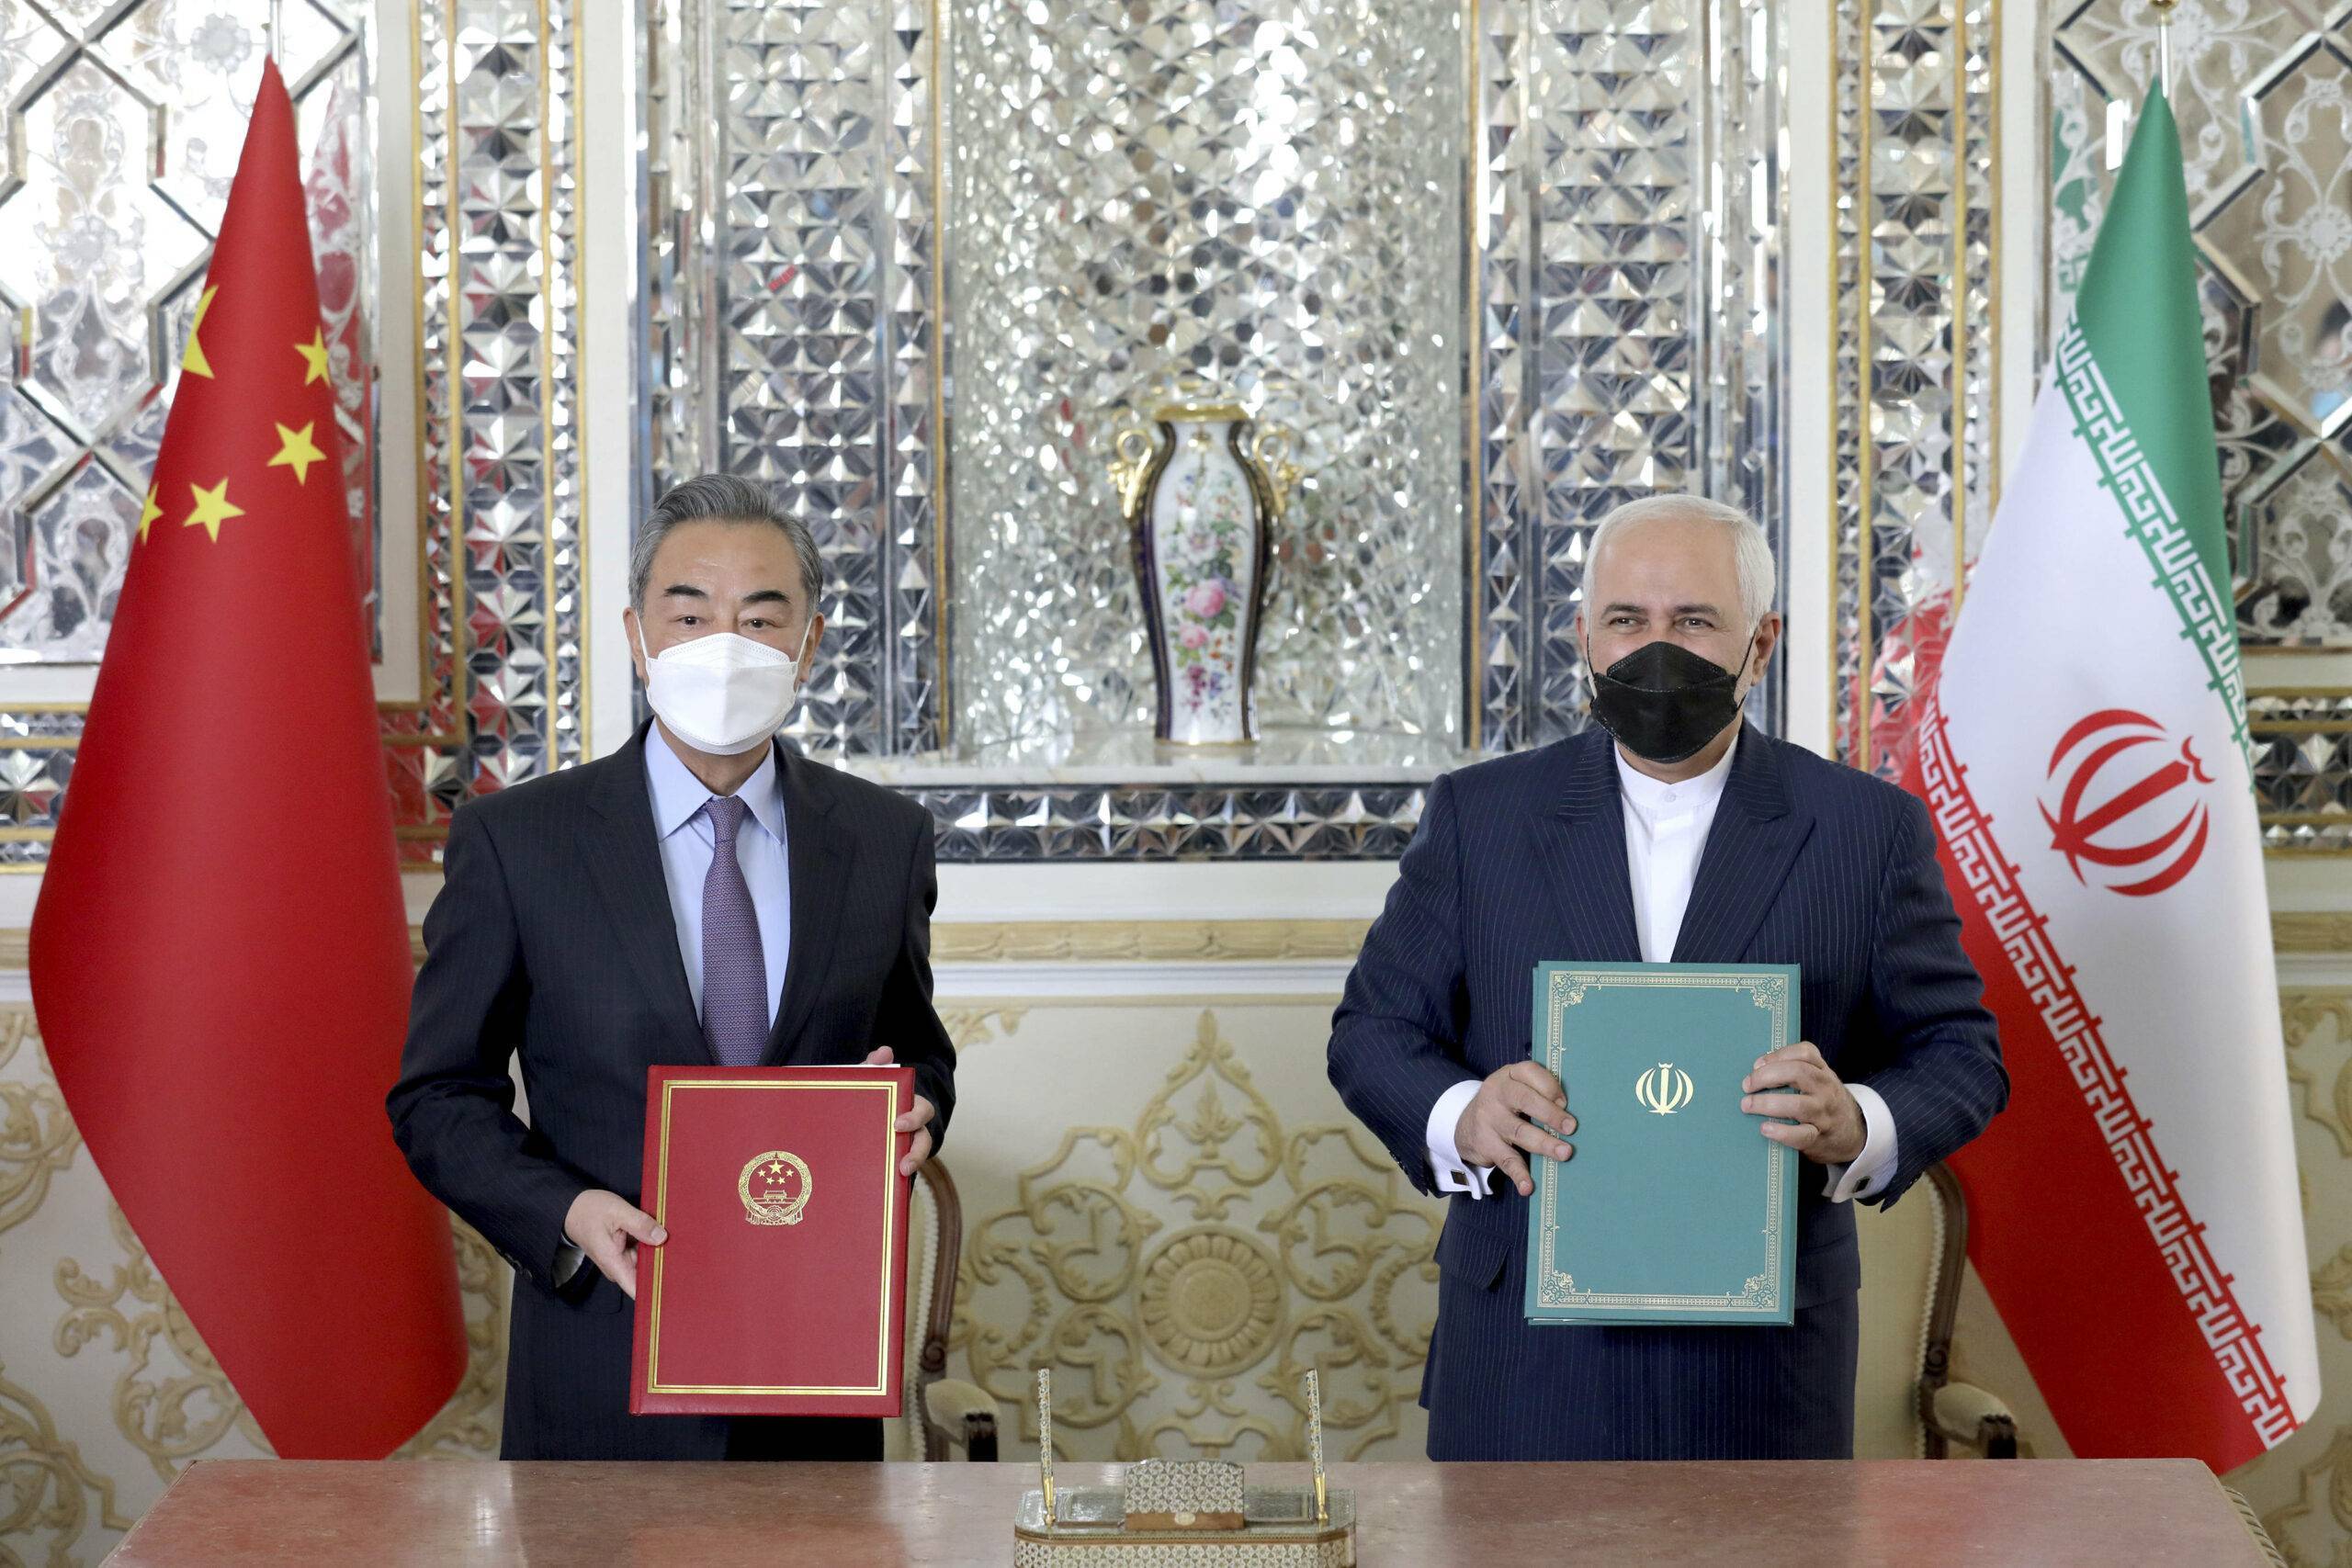 Iranian Foreign Minister Mohammad Javad Zarif, right, and his Chinese counterpart Wang Yi, pose for photos after the ceremony of signing documents, in Tehran, Iran, Saturday, March 27, 2021. Iran and China on Saturday signed a 25-year strategic cooperation agreement addressing economic issues amid crippling U.S. sanctions on Iran, state TV reported. (AP Photo/Ebrahim Noroozi)/ENO101/21086438952424//2103271321